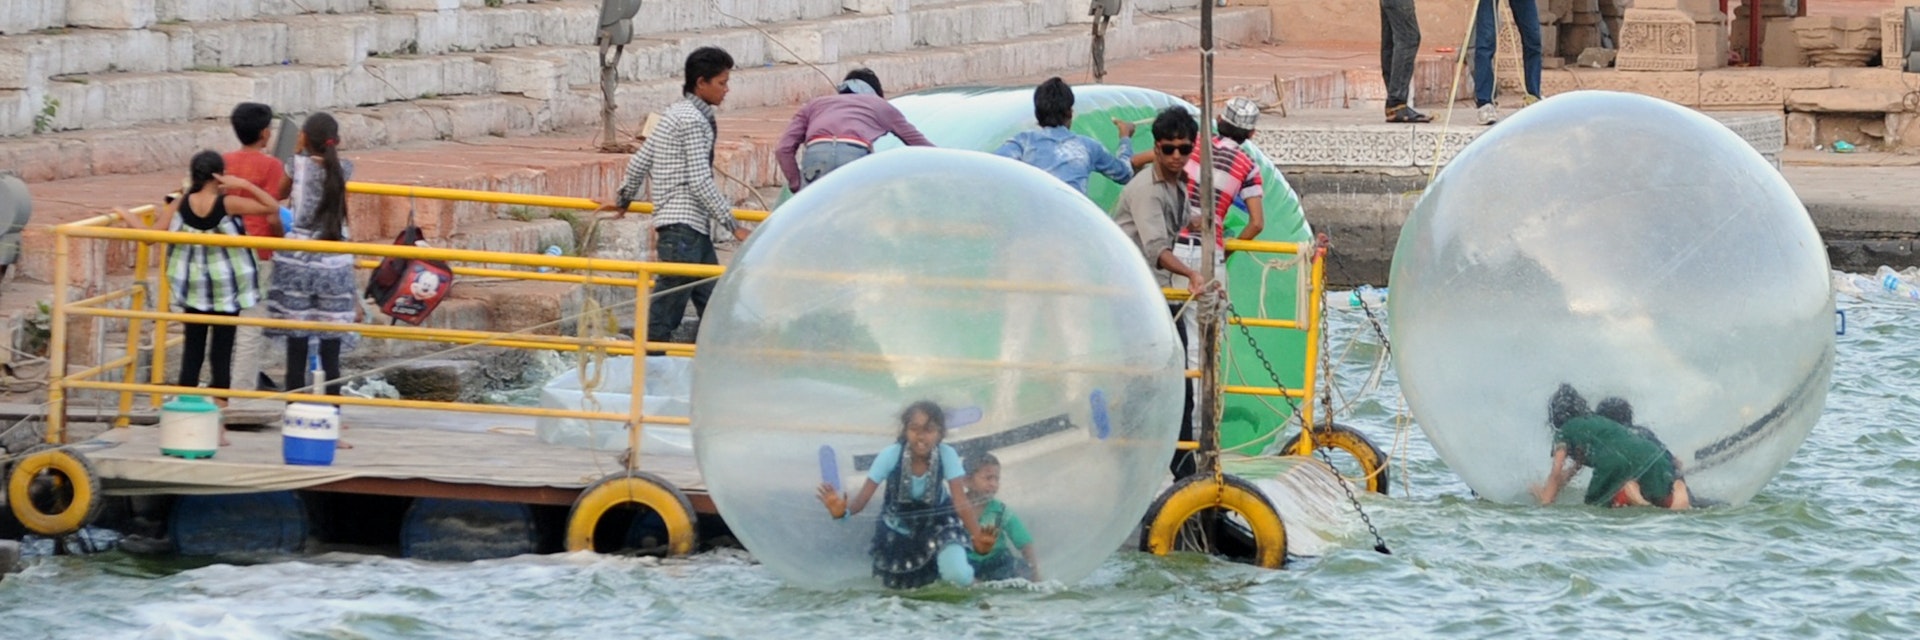 Youths enjoy a ride in floating spheres as tourists throng Kankaria Lake in Ahmedabad on June 3, 2012. Heatwave conditions persist over much of India as the country's expected moonsoon, crucial to farmers and growth in Asia's third-largest economy, has missed its normal arrival date but forecasters said they were confident the rains would arrive soon. Normally the rains begin sweeping across the subcontinent from June 1 to late September and in recent years they have started early.  AFP PHOTO / Sam PANTHAKY        (Photo credit should read SAM PANTHAKY/AFP/GettyImages)